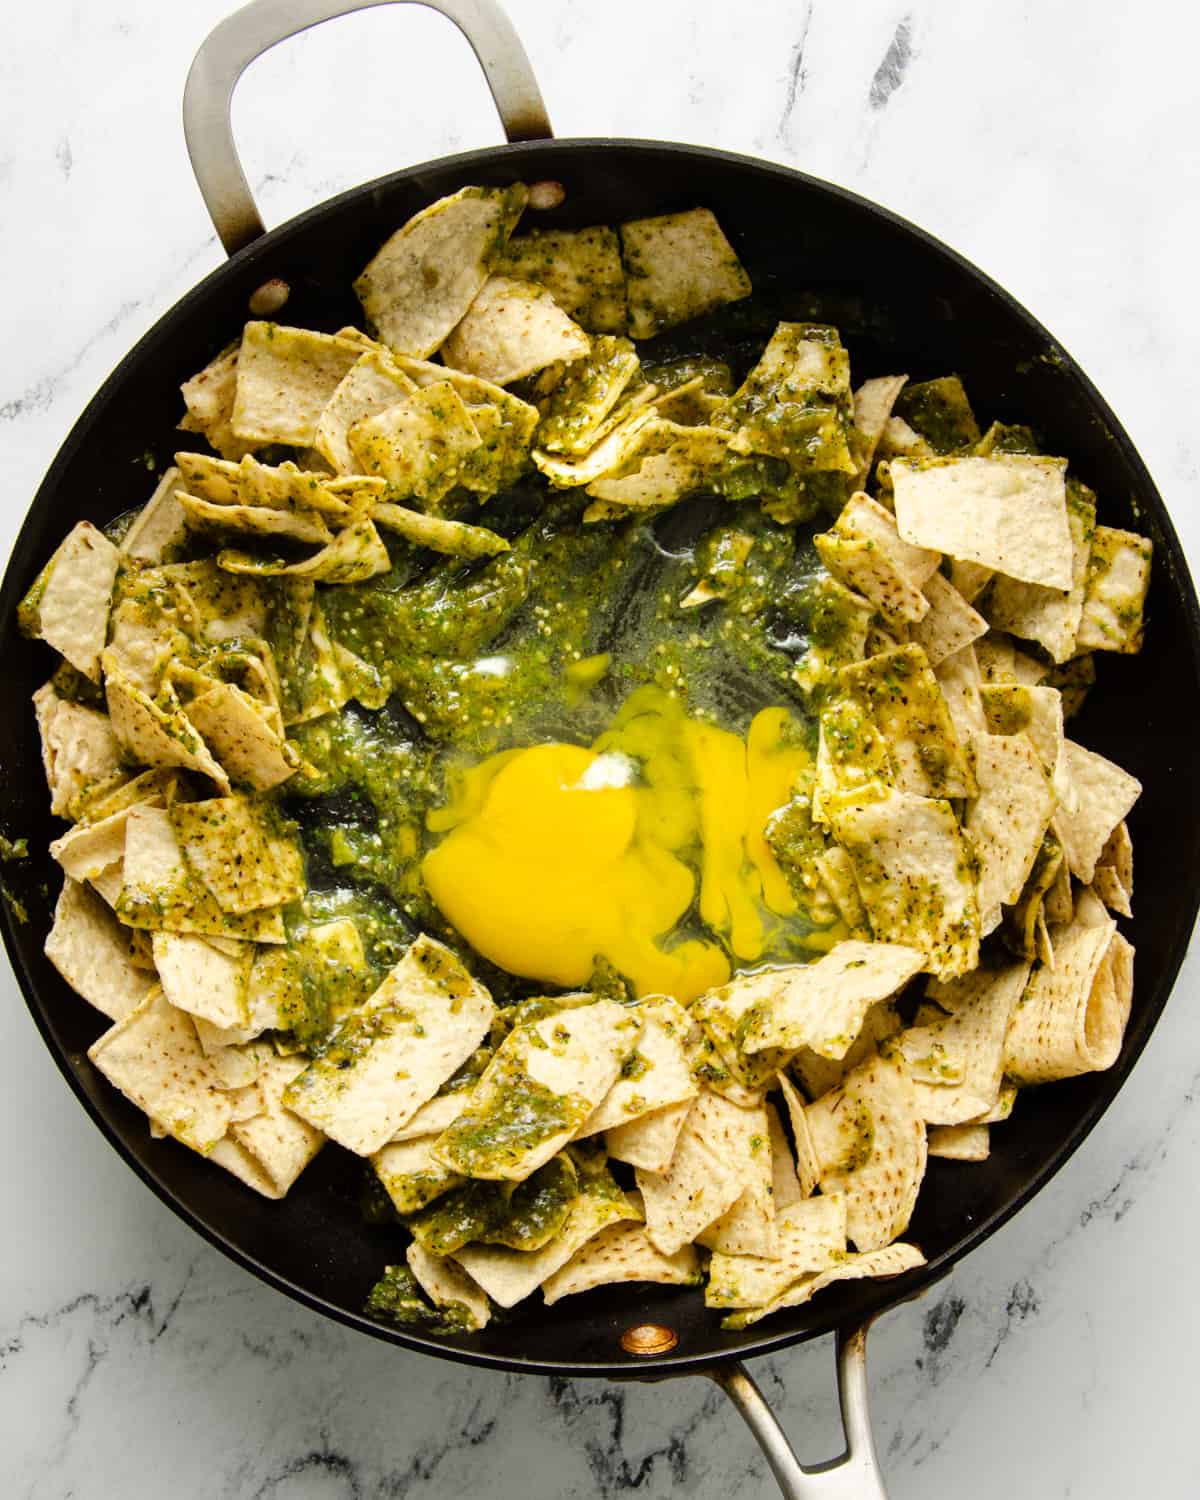 A skillet with tortilla chips, salsa verde, and eggs.